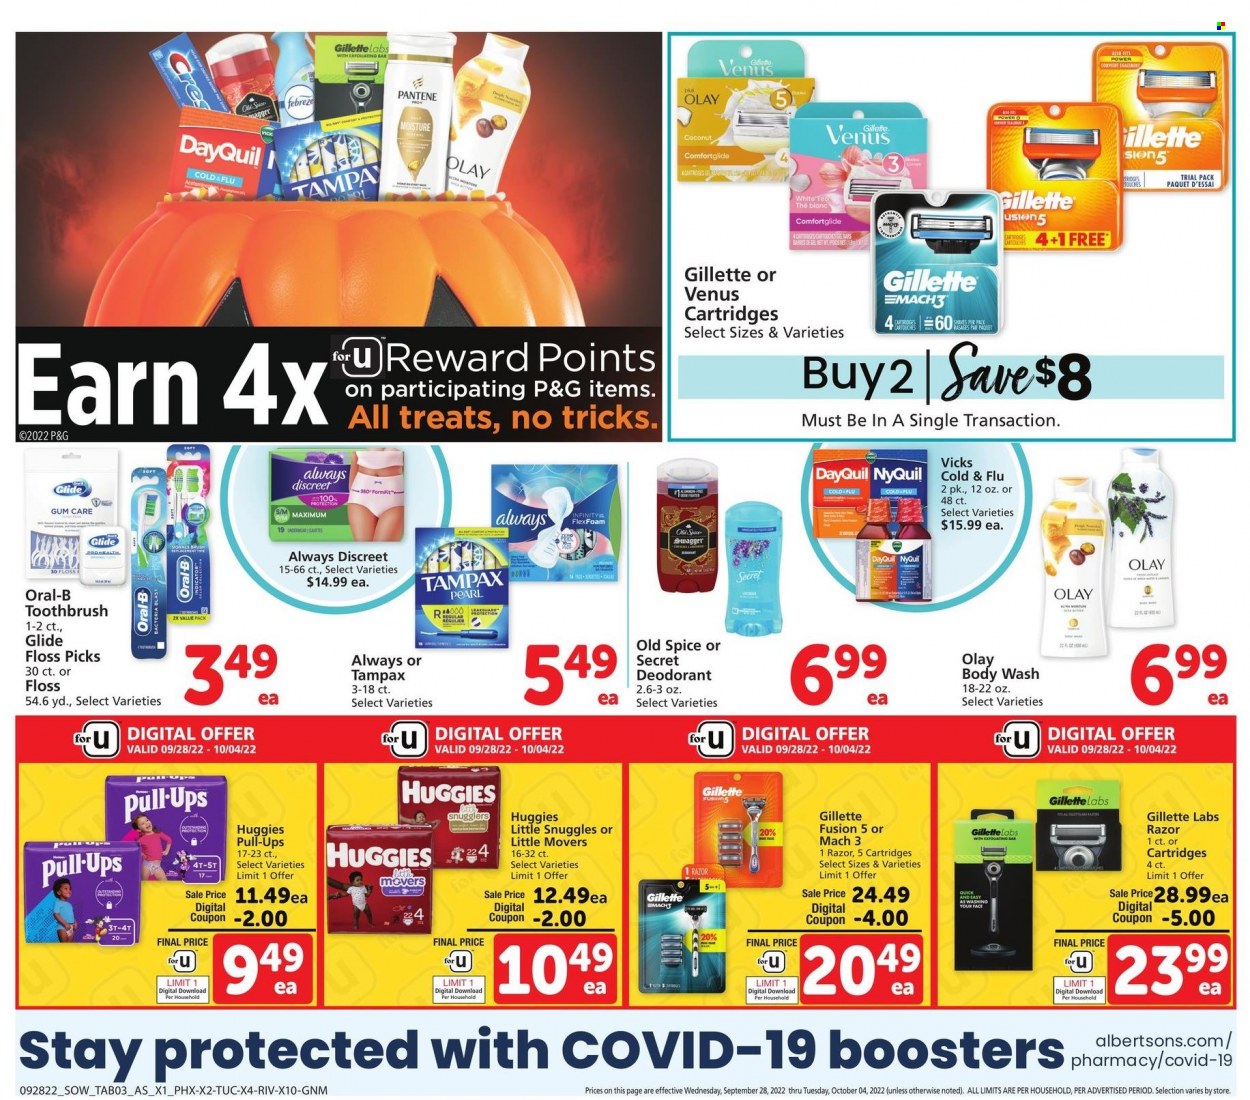 thumbnail - Safeway Flyer - 09/28/2022 - 10/04/2022 - Sales products - coconut, spice, tea, Febreze, body wash, Old Spice, toothbrush, Oral-B, Tampax, Always Discreet, Olay, Infinity, Pantene, Gillette, razor, Venus, DayQuil, Cold & Flu, NyQuil, Vicks, Huggies. Page 7.